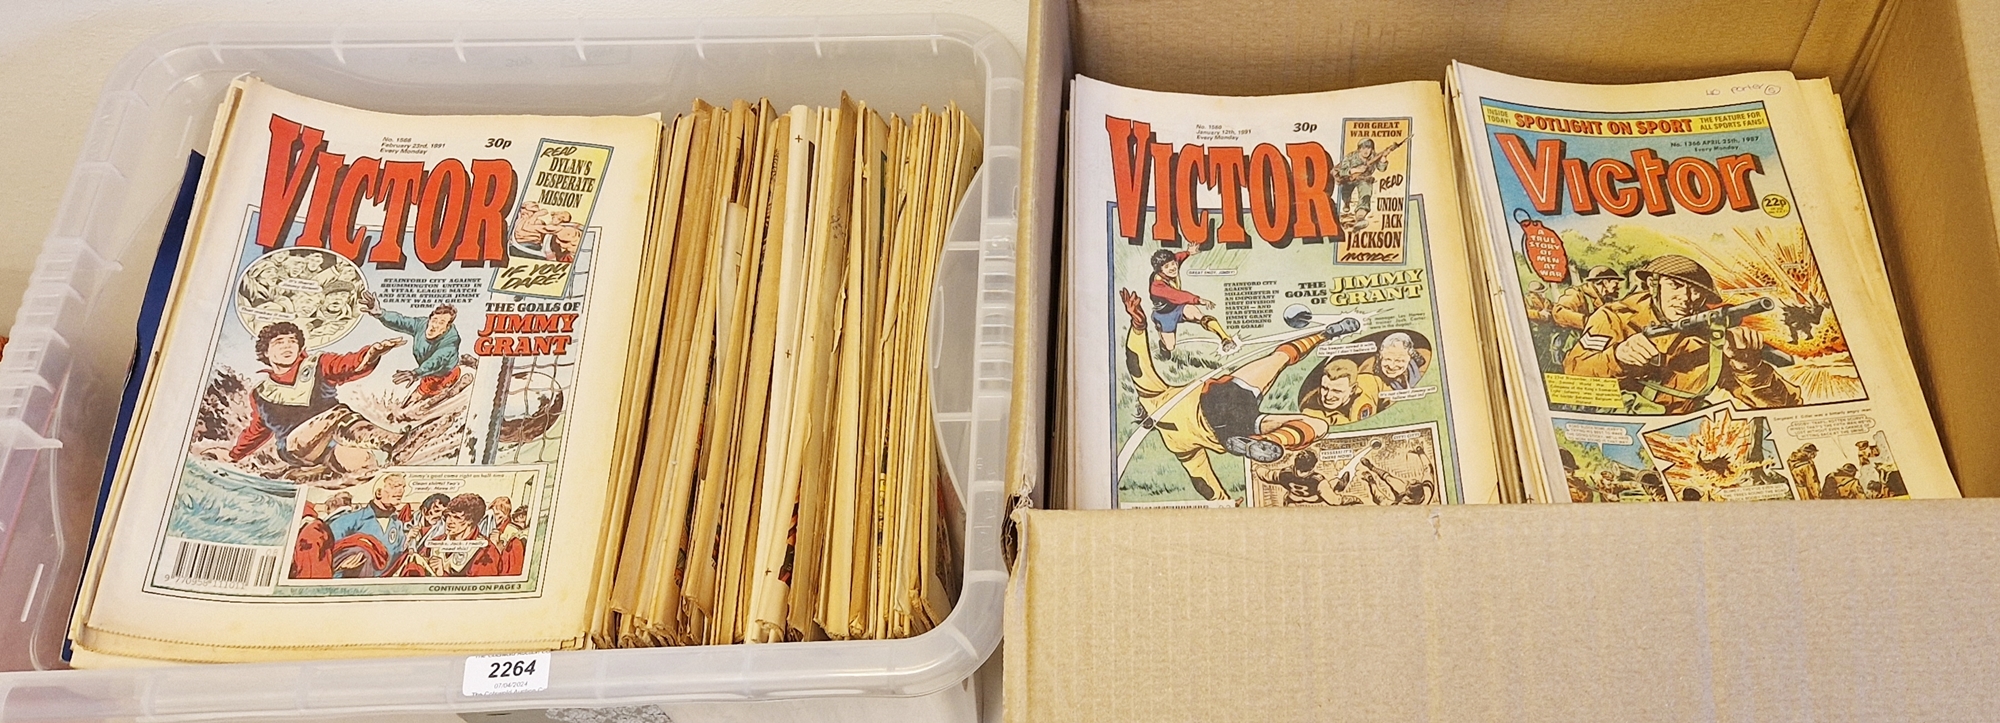 Large quantity of Victor comics from the 70's, 80's and 90's (2 boxes)